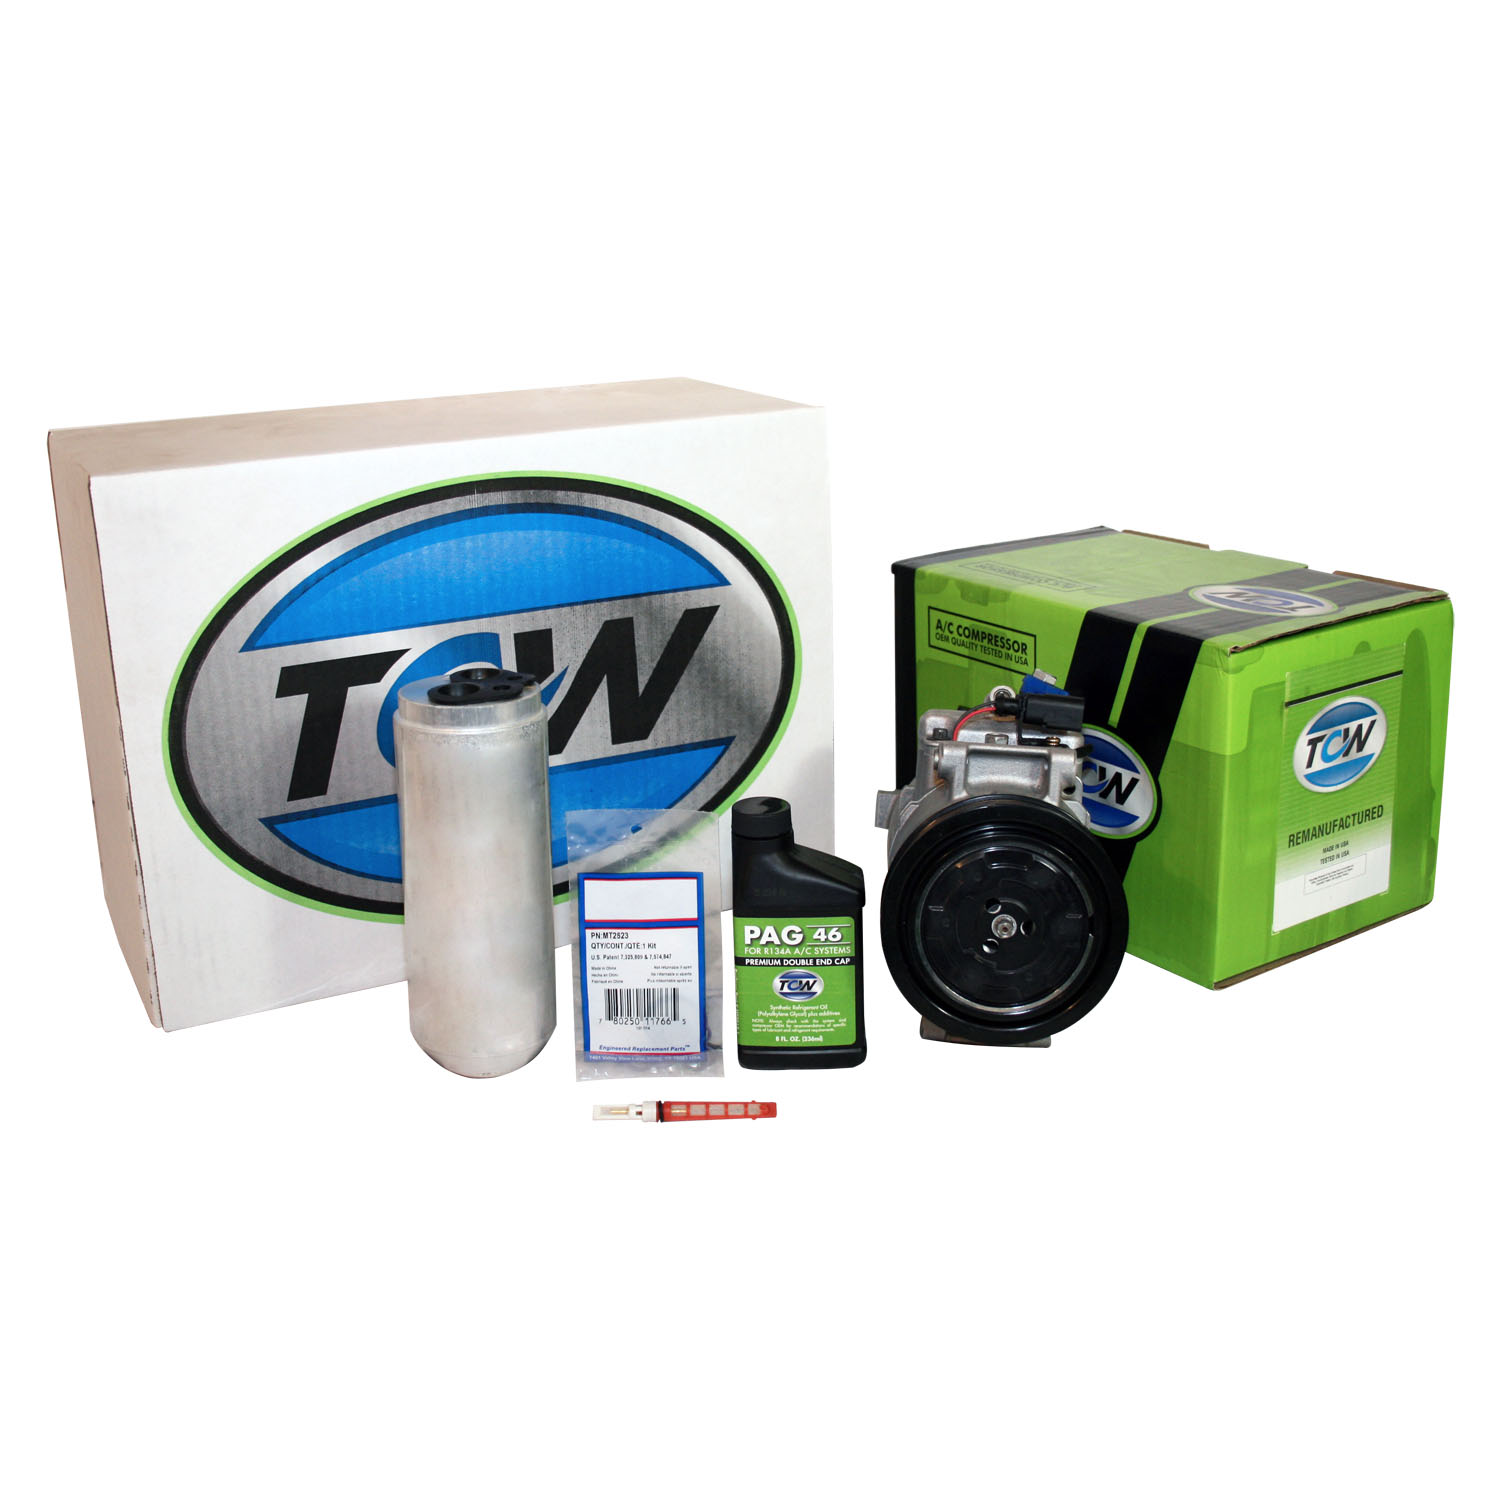 TCW Vehicle A/C Kit K1000395R Remanufactured Product Image field_60b6a13a6e67c